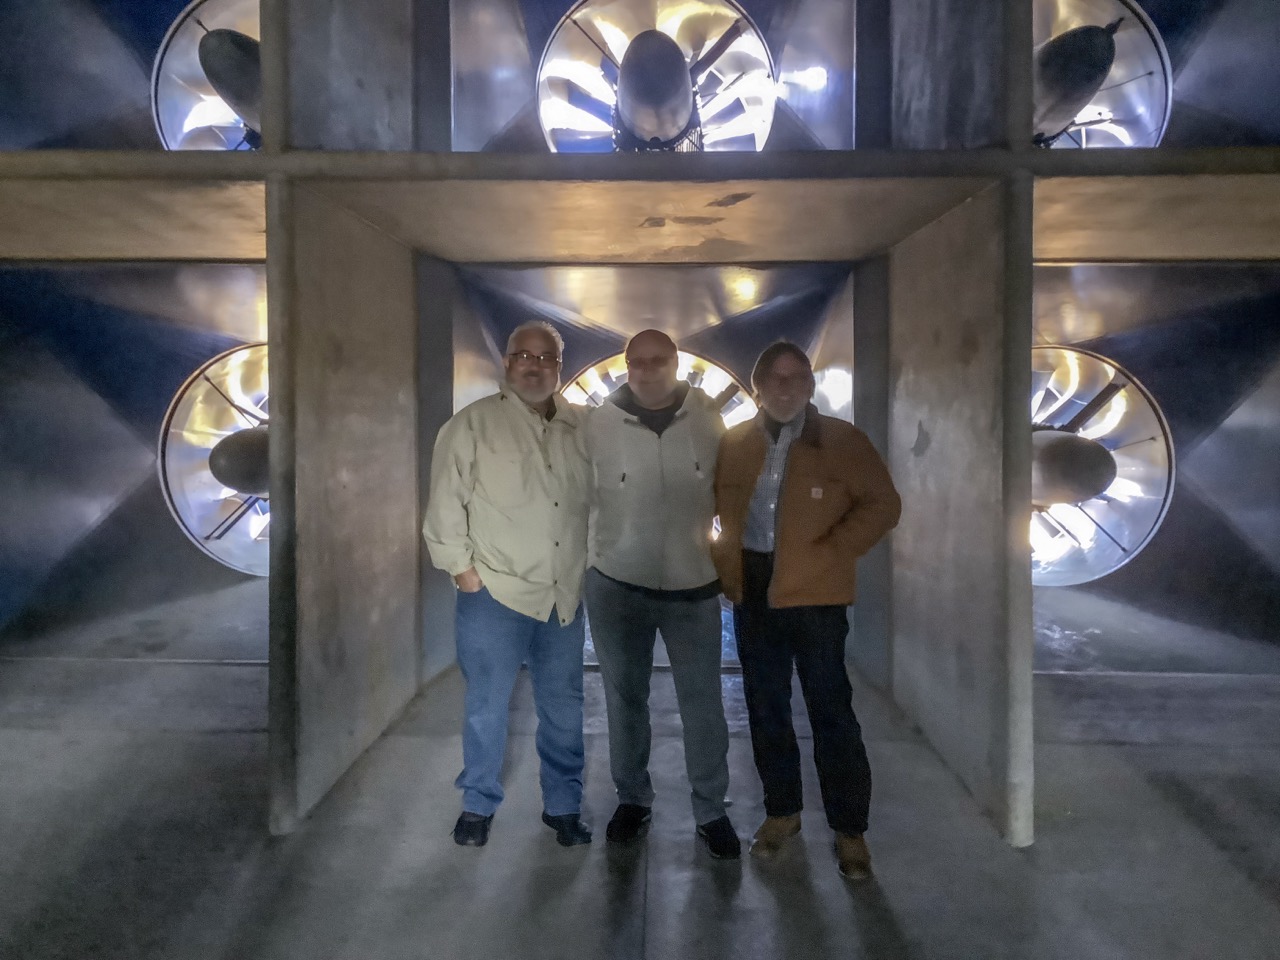 Manny Oyola, Mike Silvers and George Ebersold at the IBHS Testing Facility in South Carolina